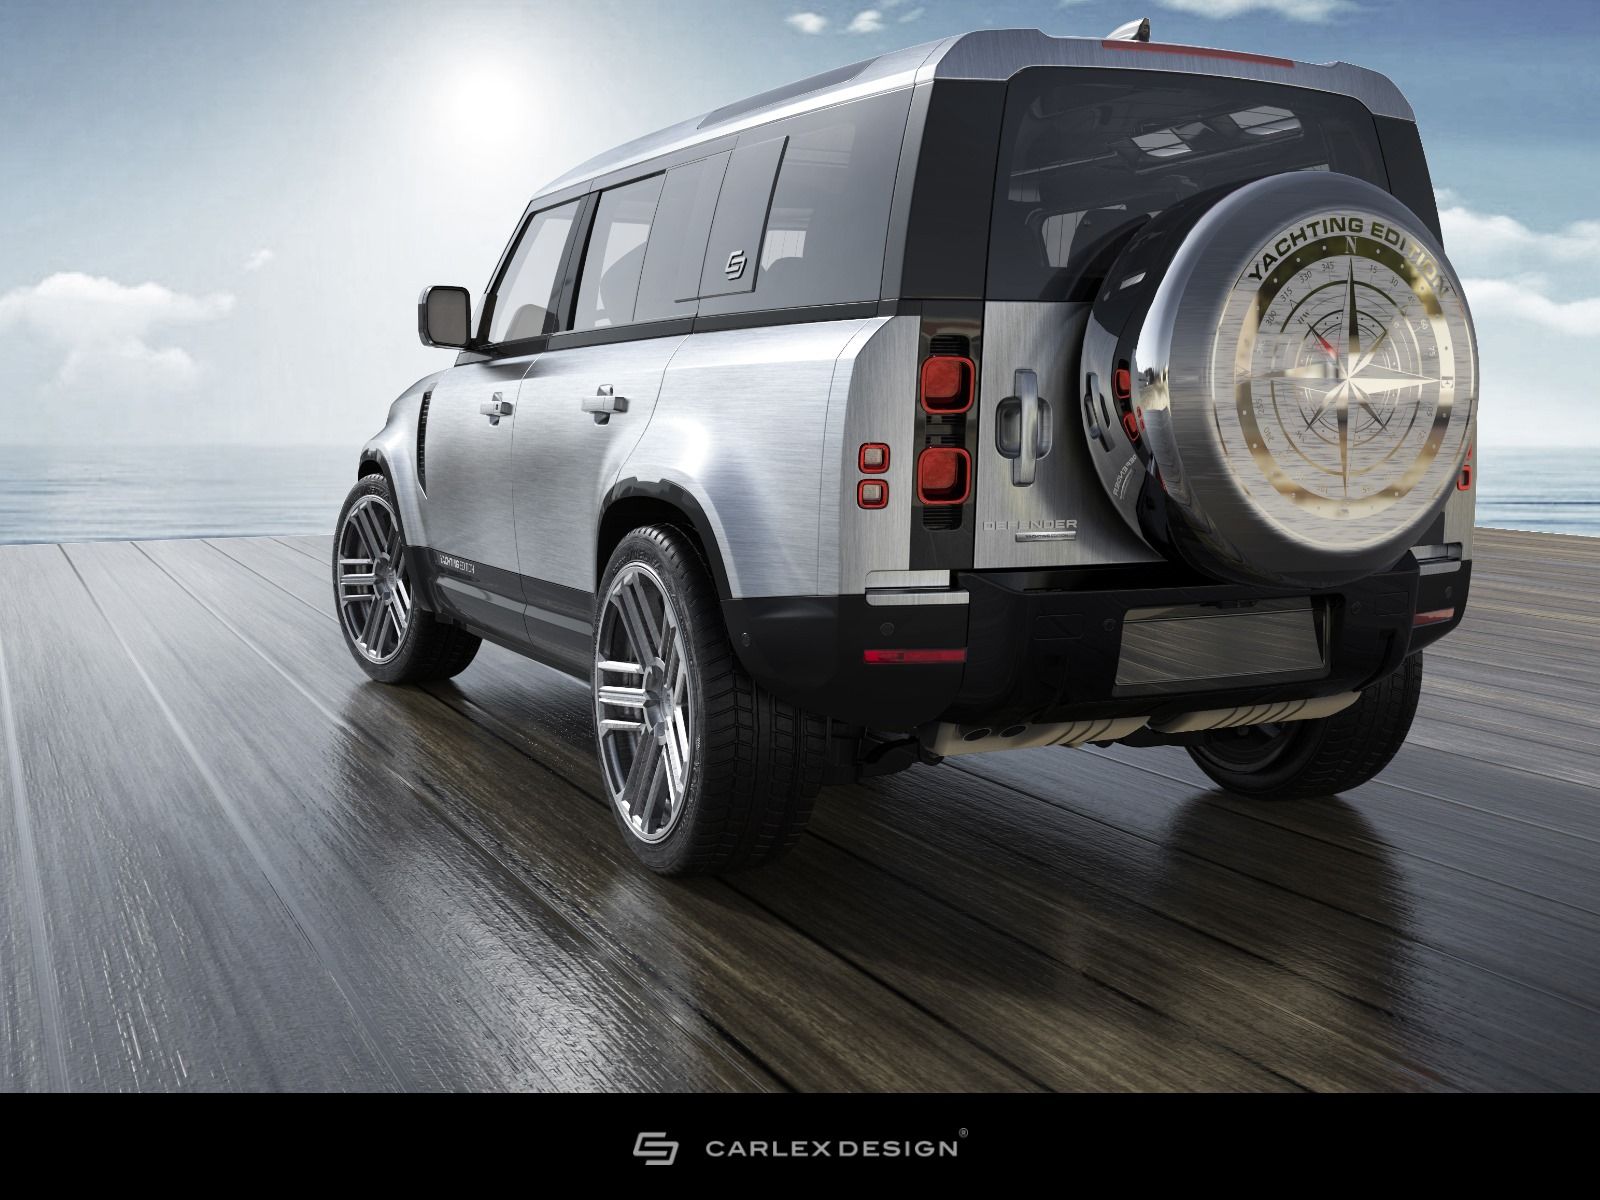 2020 Land Rover Defender Yachting Edition by Carlex Design